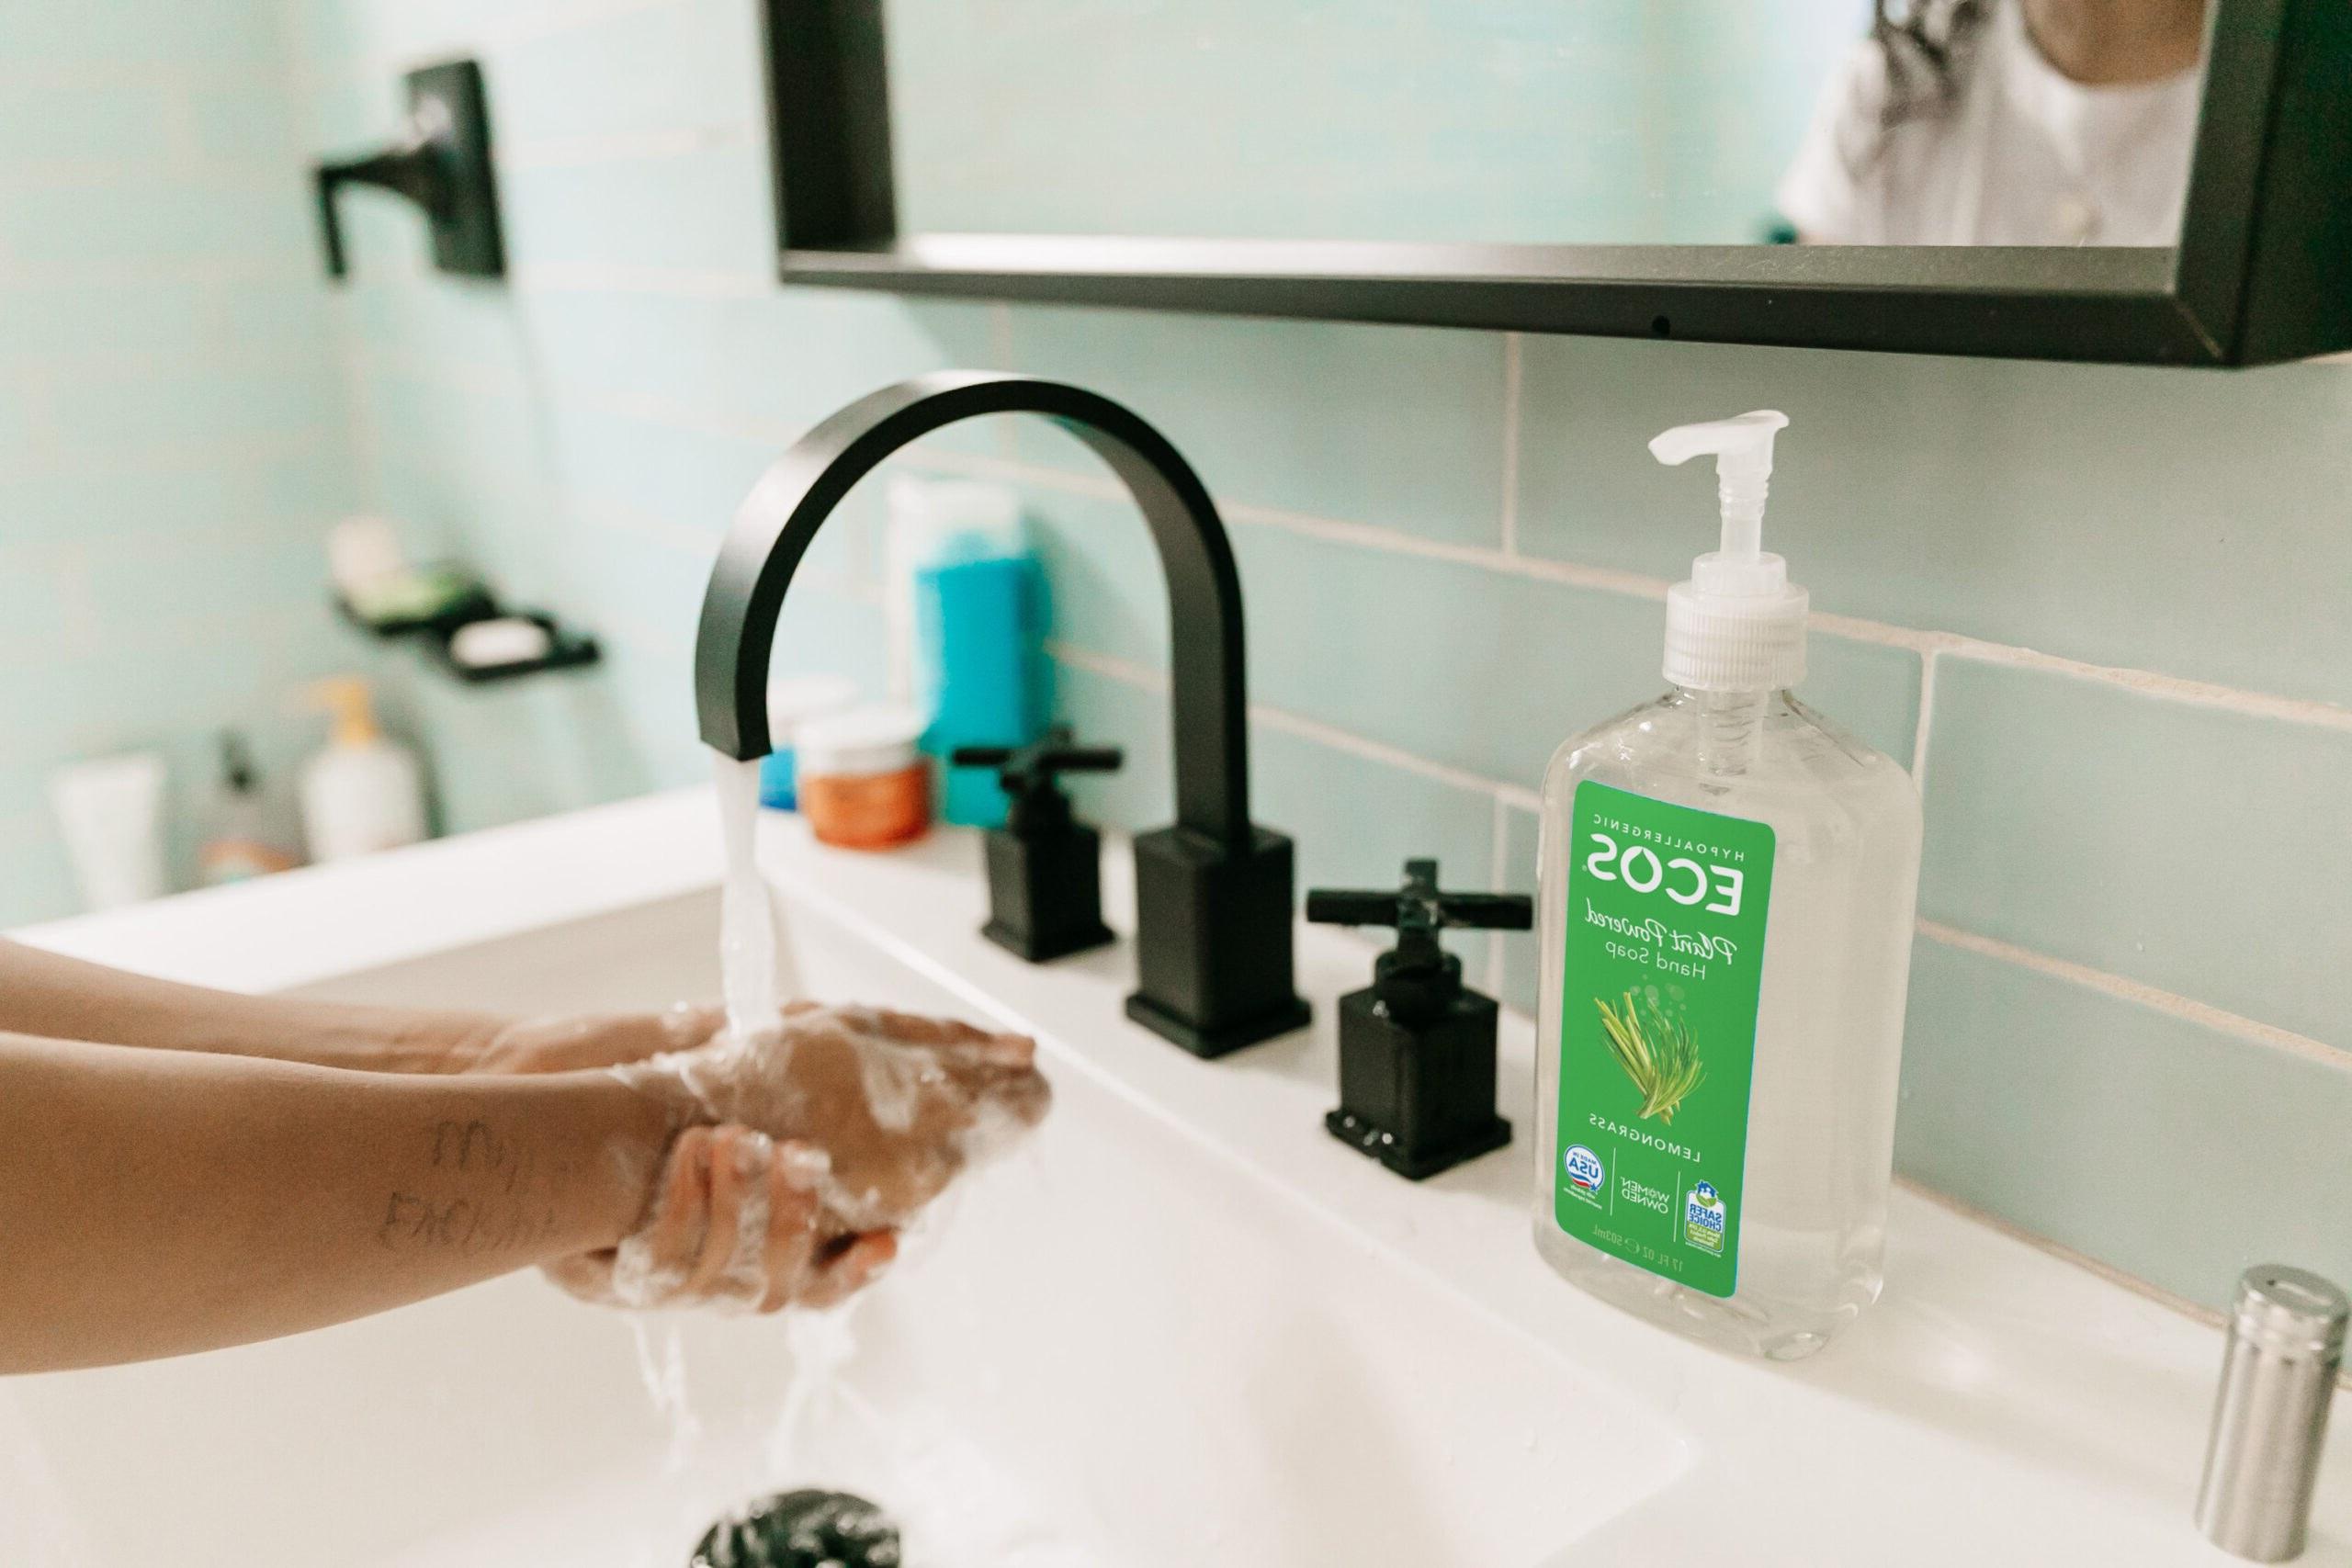 Washing hands with ECOS lemongrass soap